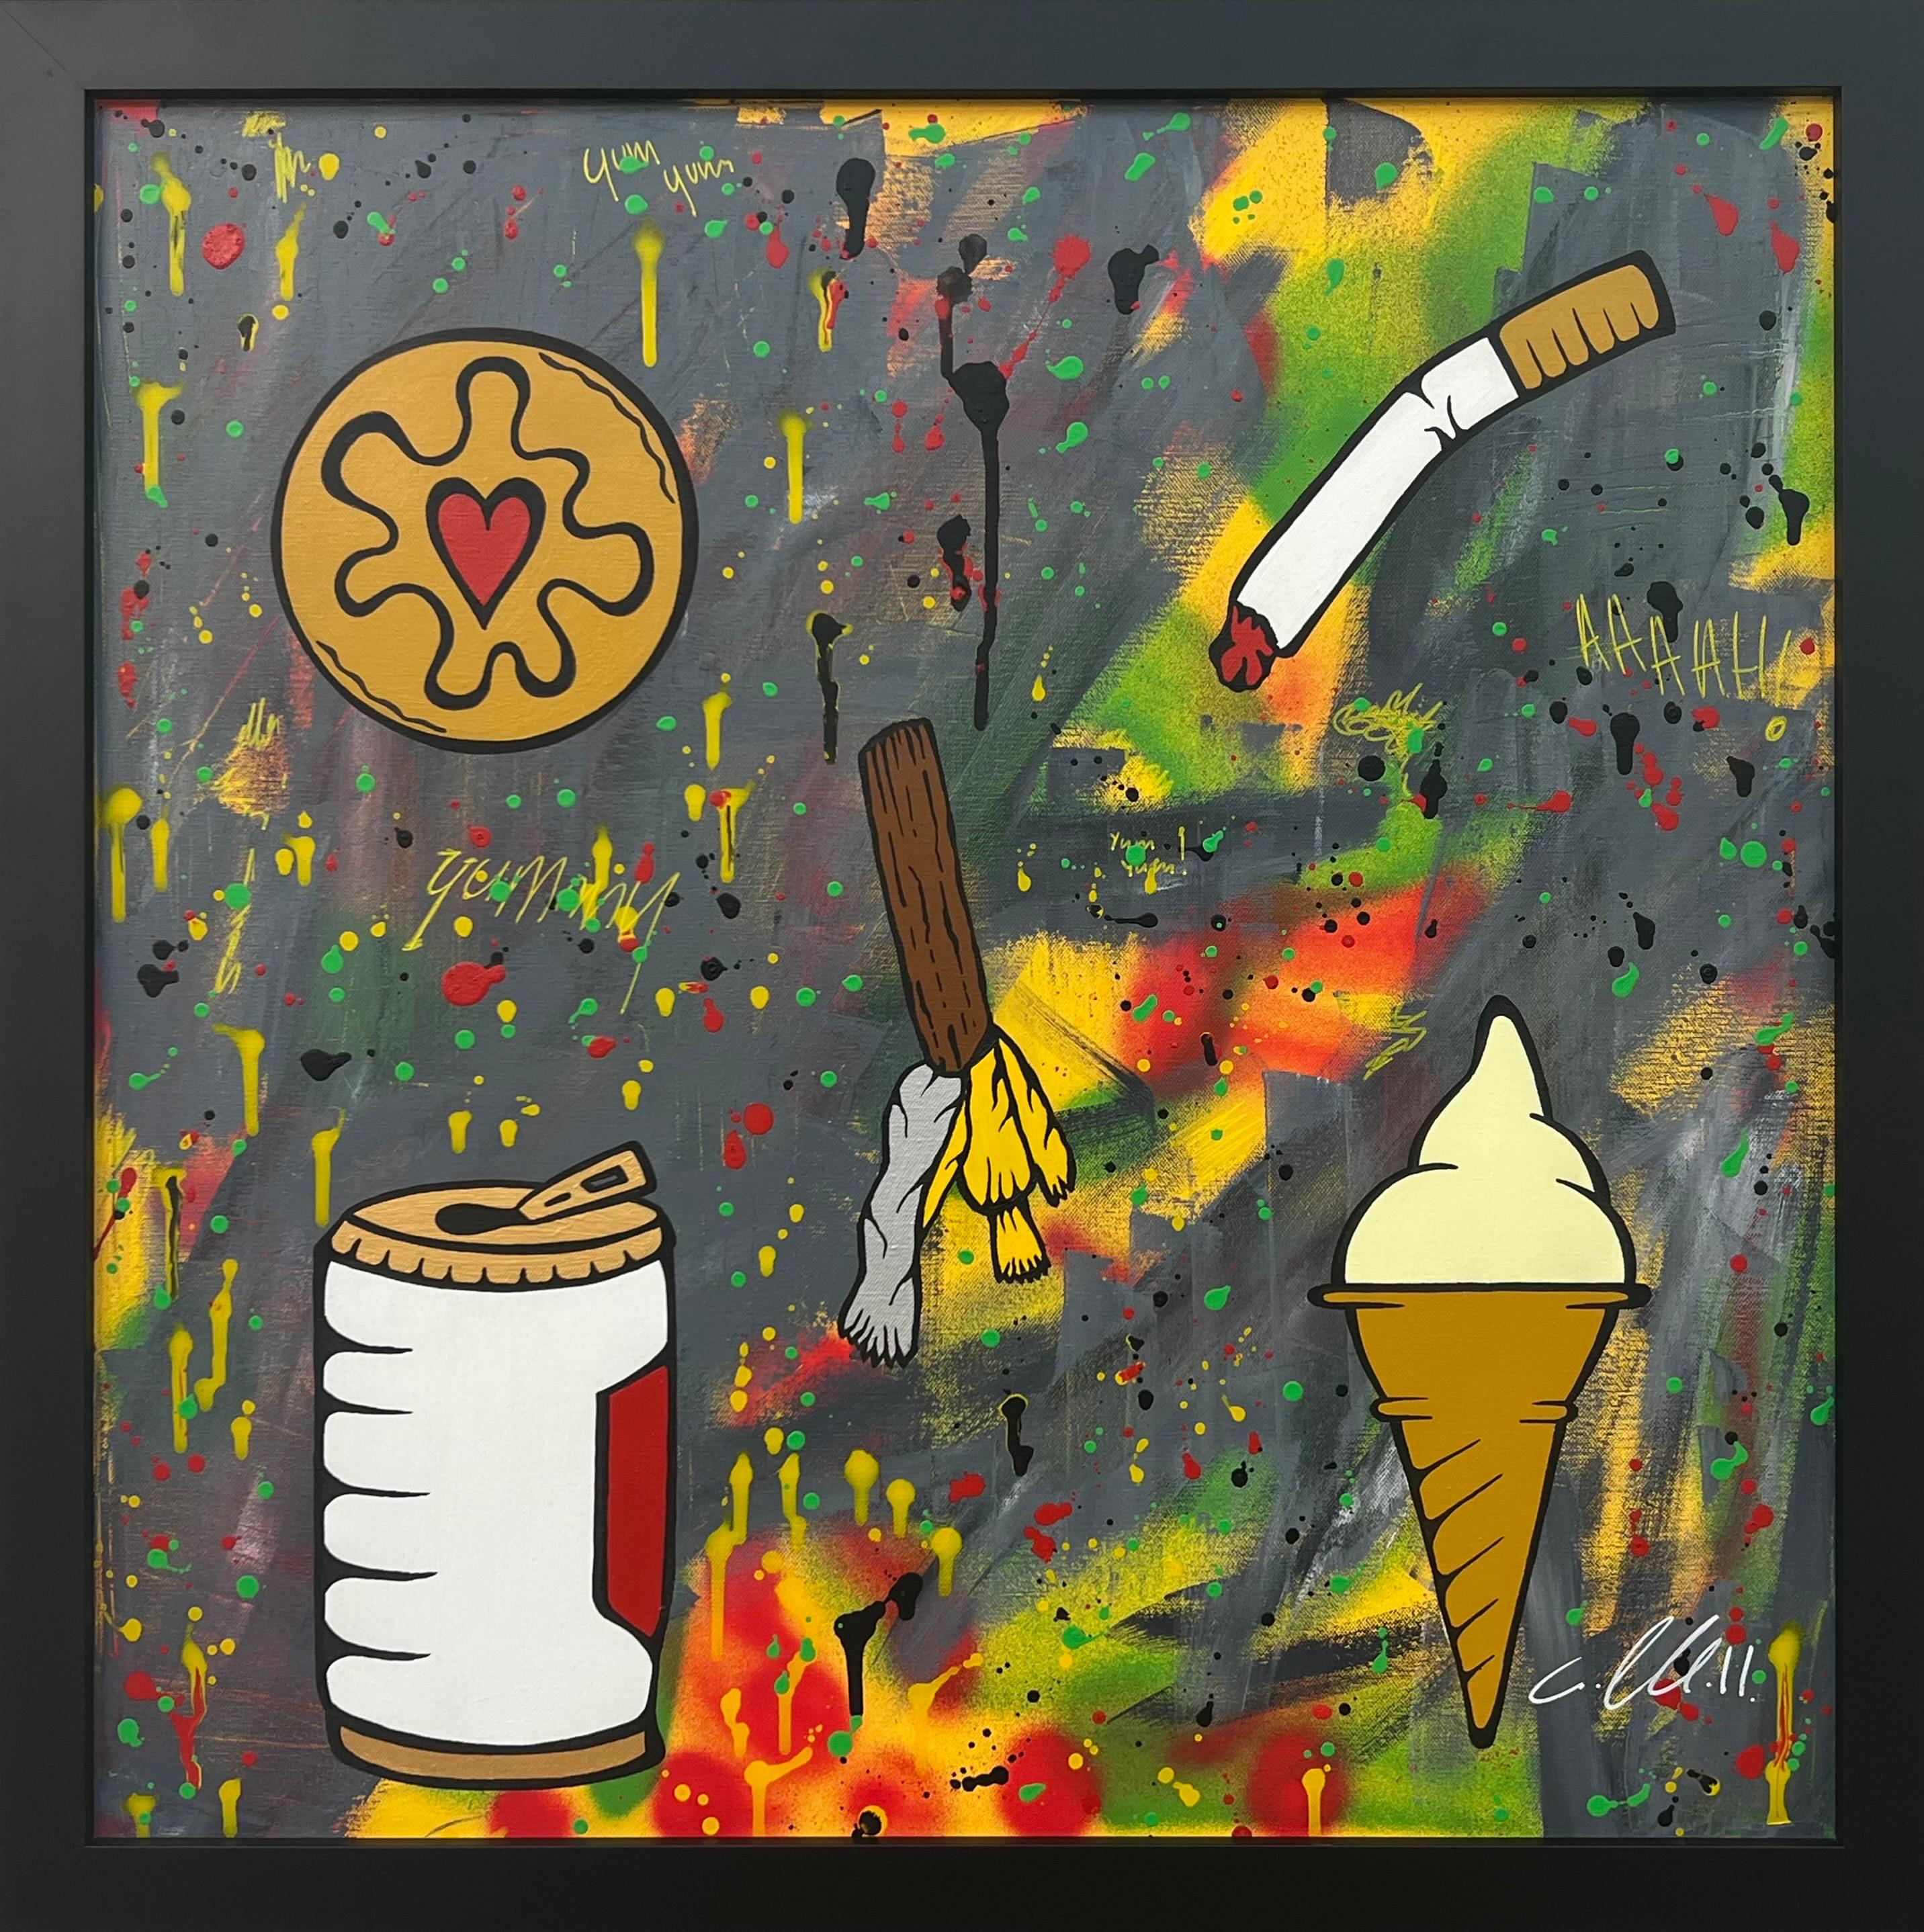 Chris Pegg Figurative Painting - Yummy Sweets & Treats Pop Art on Abstract Background by British Graffiti Artist